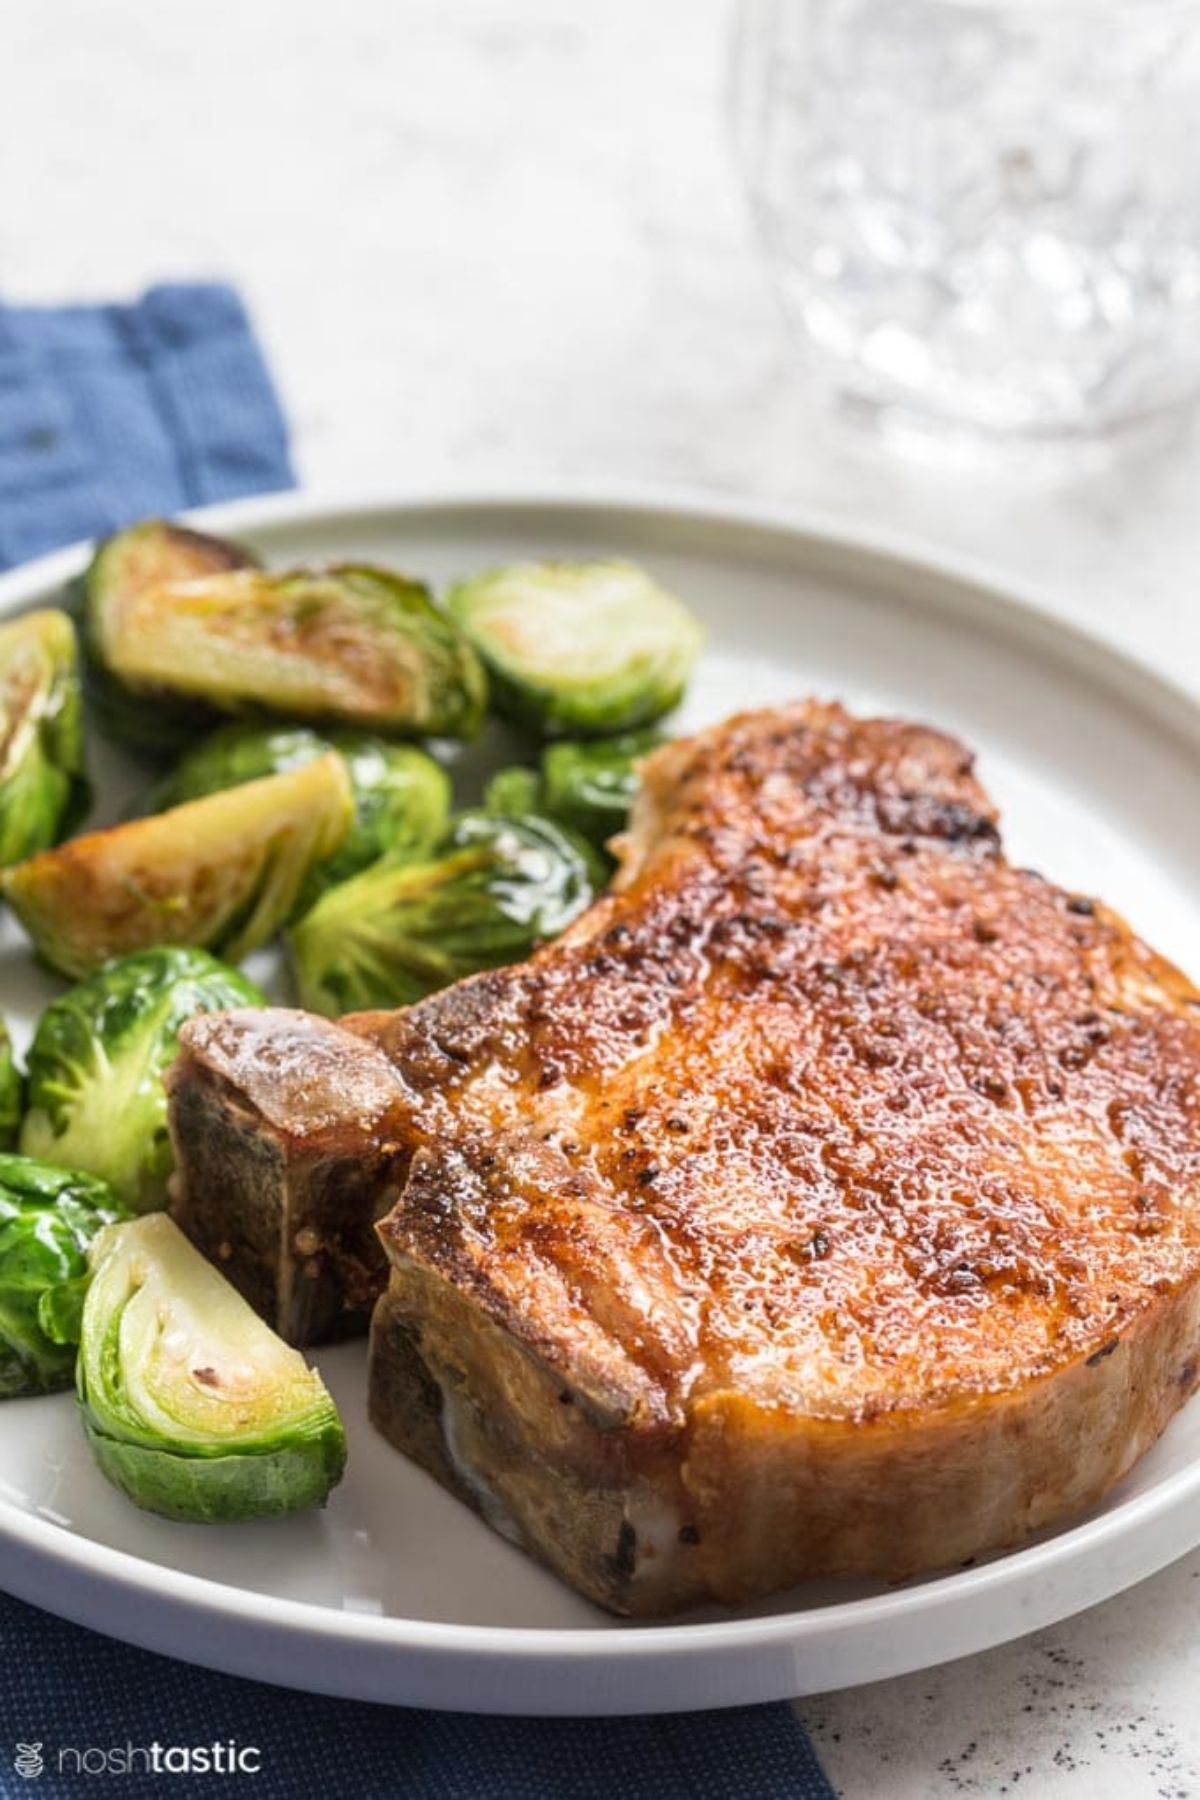 A round white pplate contains cooked chopped brussel sprouts and a pork chop